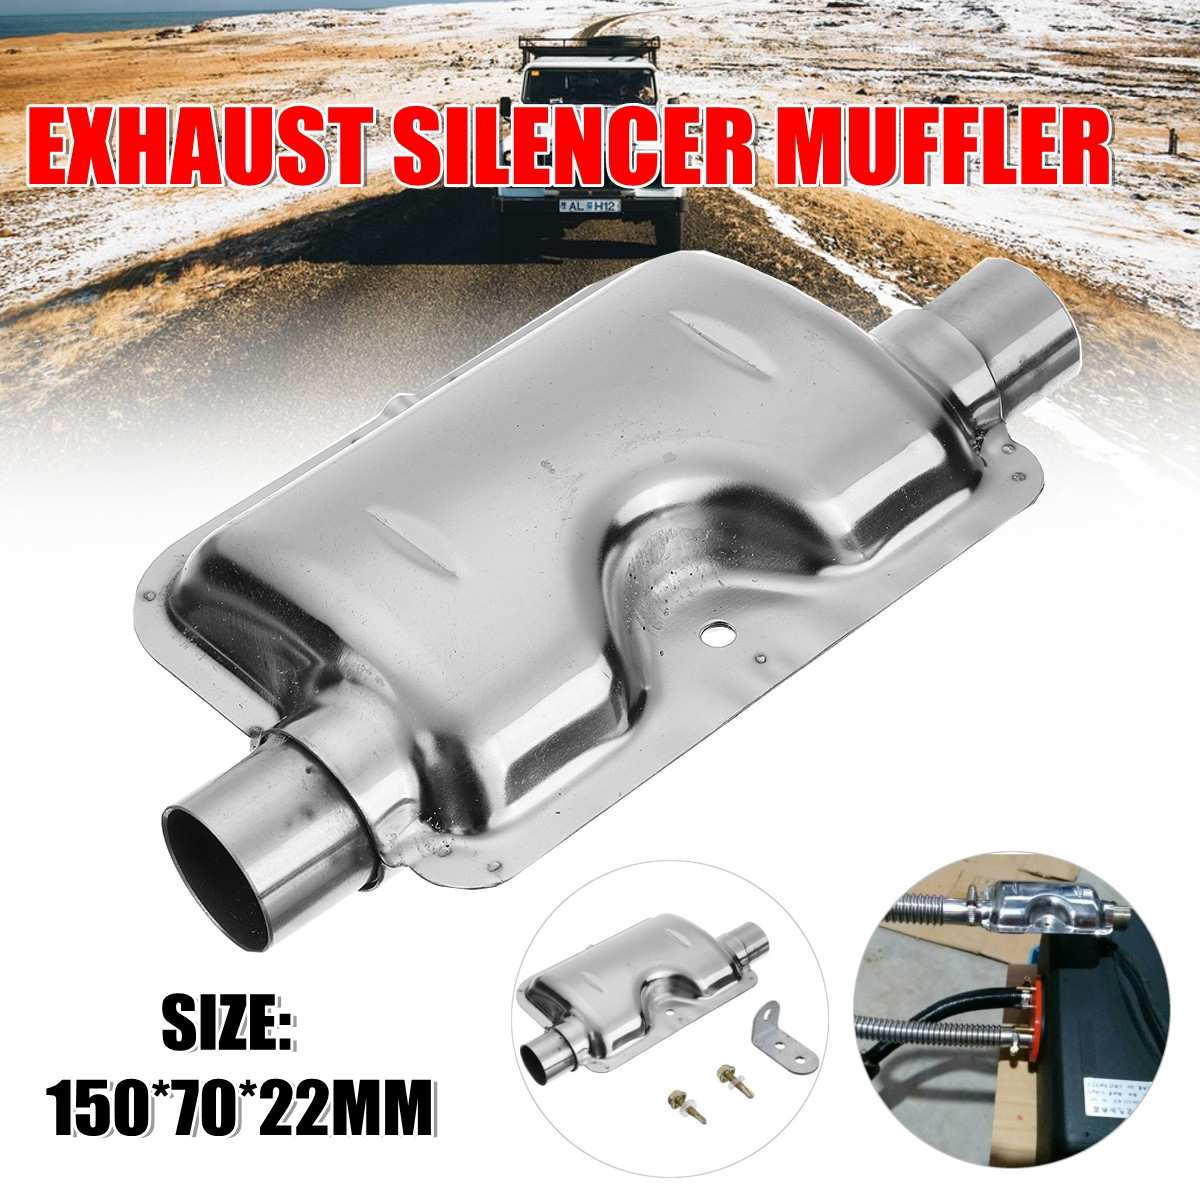 Parking heater stainless steel exhaust muffler 24mm and Exhaust Pipe  suitable for car air diesel genuine Car Accessories - Price history &  Review, AliExpress Seller - Hcalory Official Store